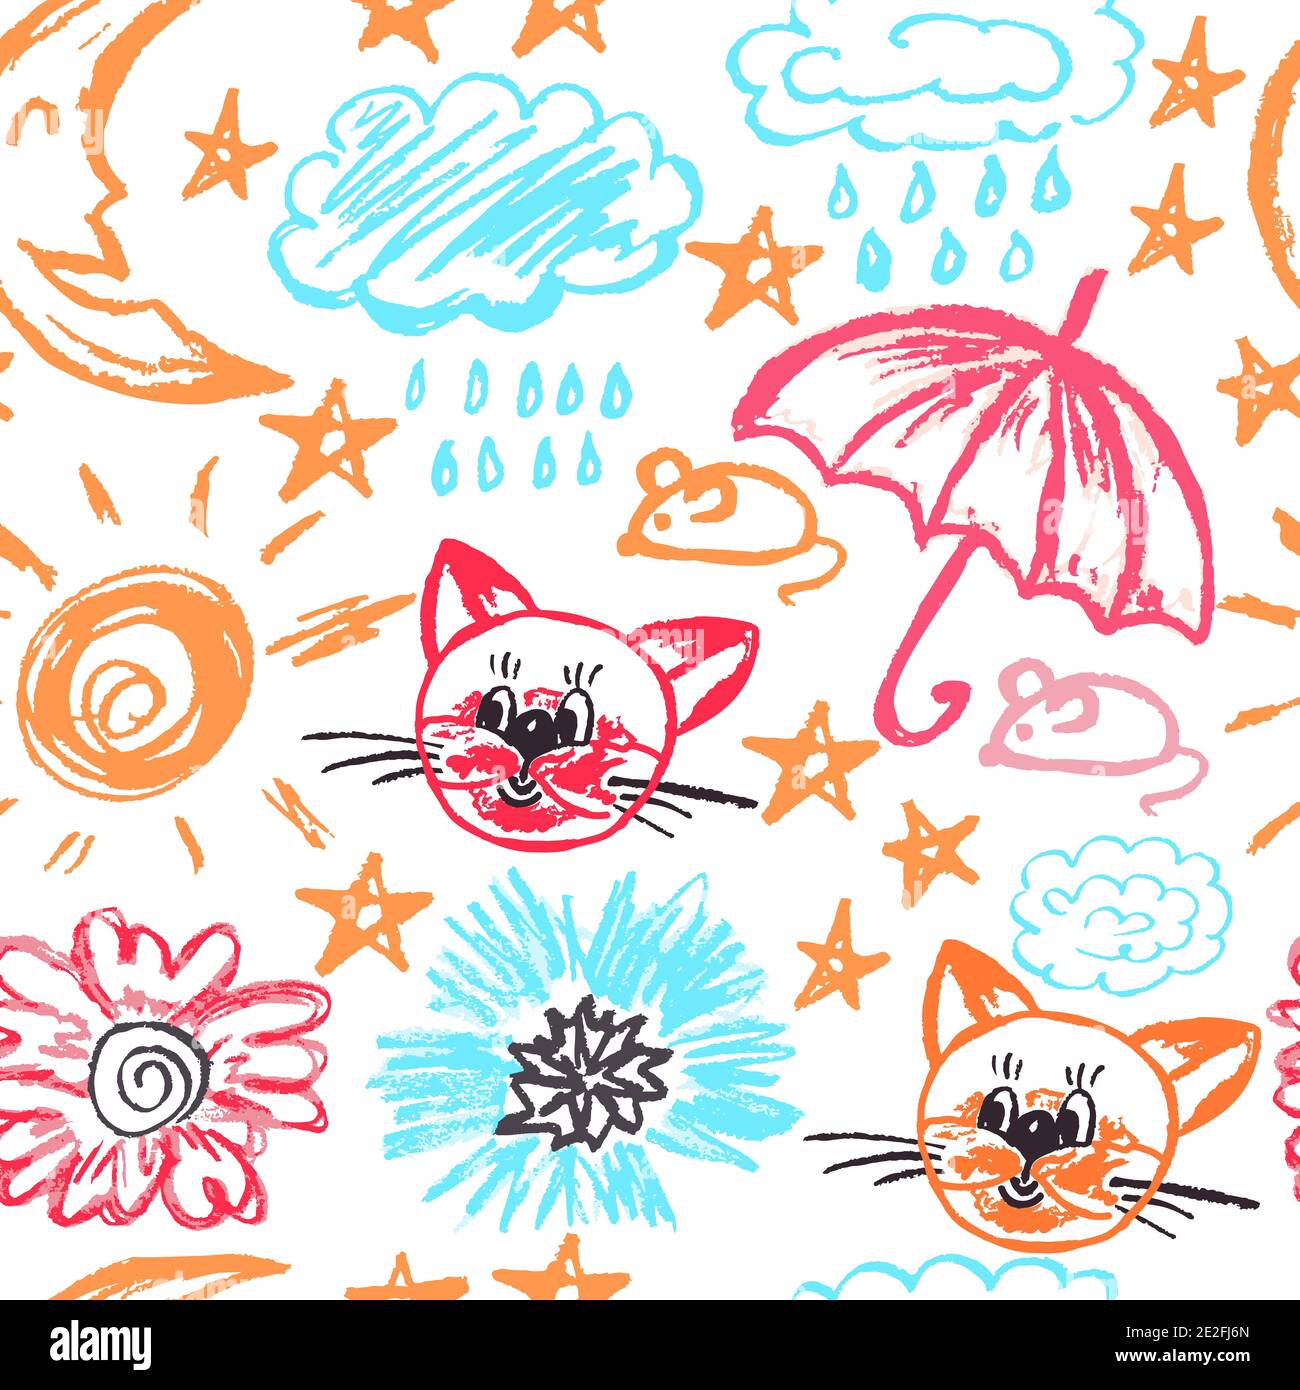 Seamless drawing. Colored wax crayons. Icons, signs, symbols, pins. Clouds, rain, moon, stars, umbrella, mouse, cat, flowers Stock Vector